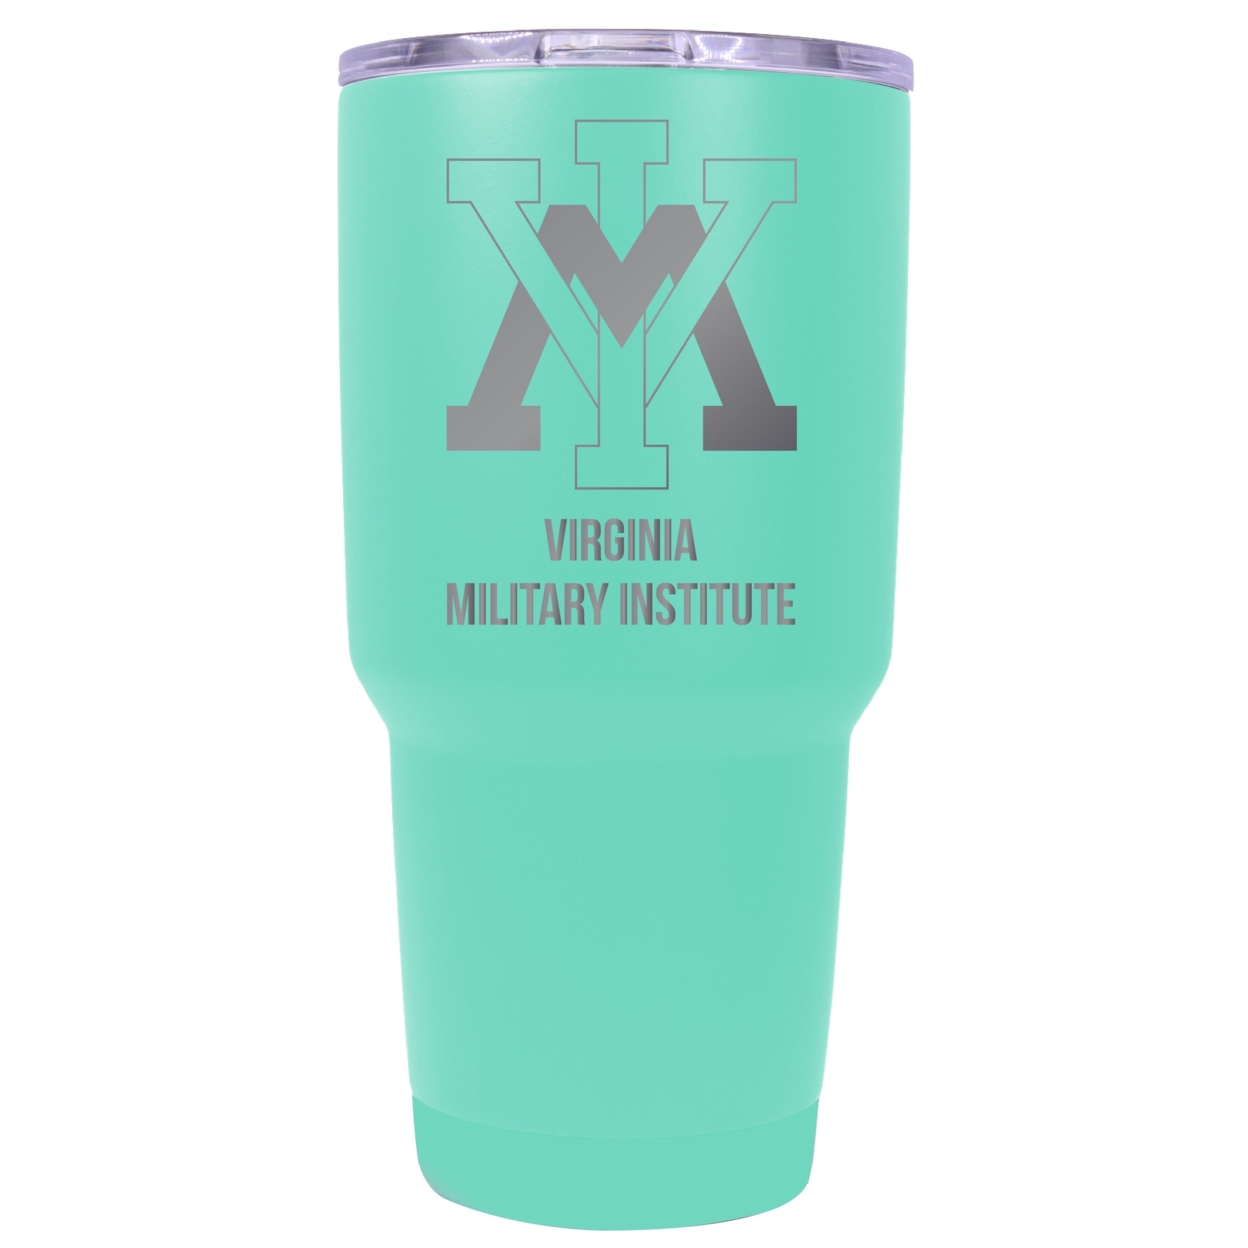 VMI Keydets 24 Oz Laser Engraved Stainless Steel Insulated Tumbler - Choose Your Color. - Seafoam